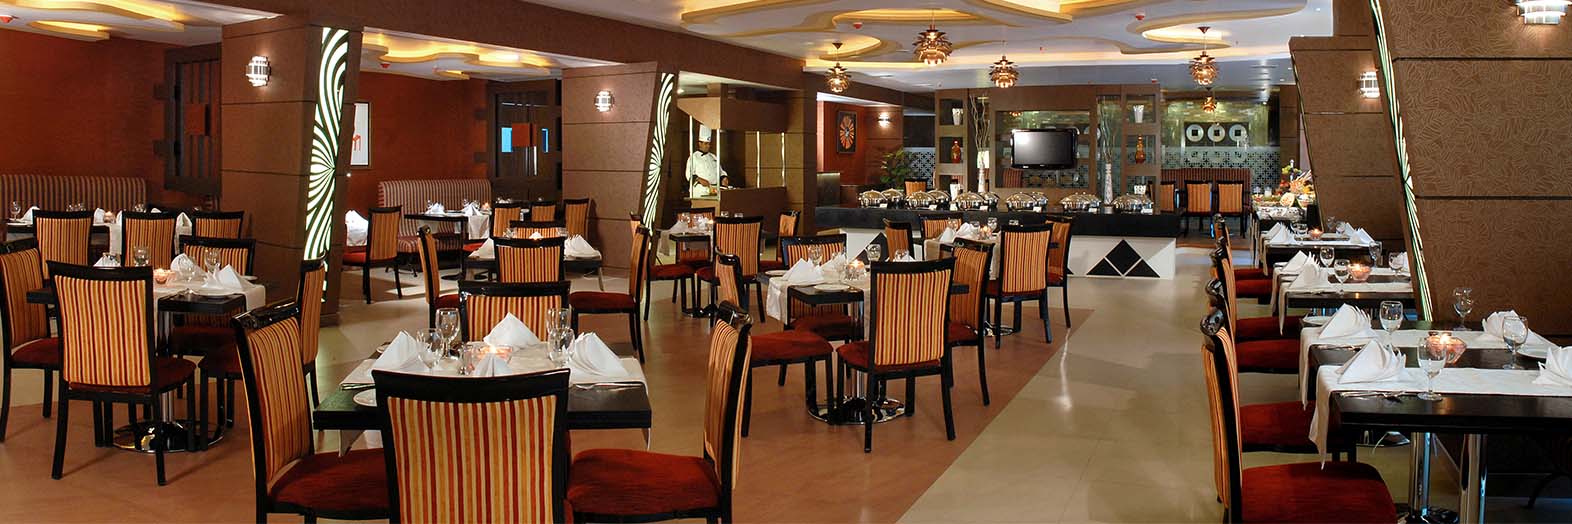 Fortune Park Vallabha–Hotels in Hyderabad  Dining